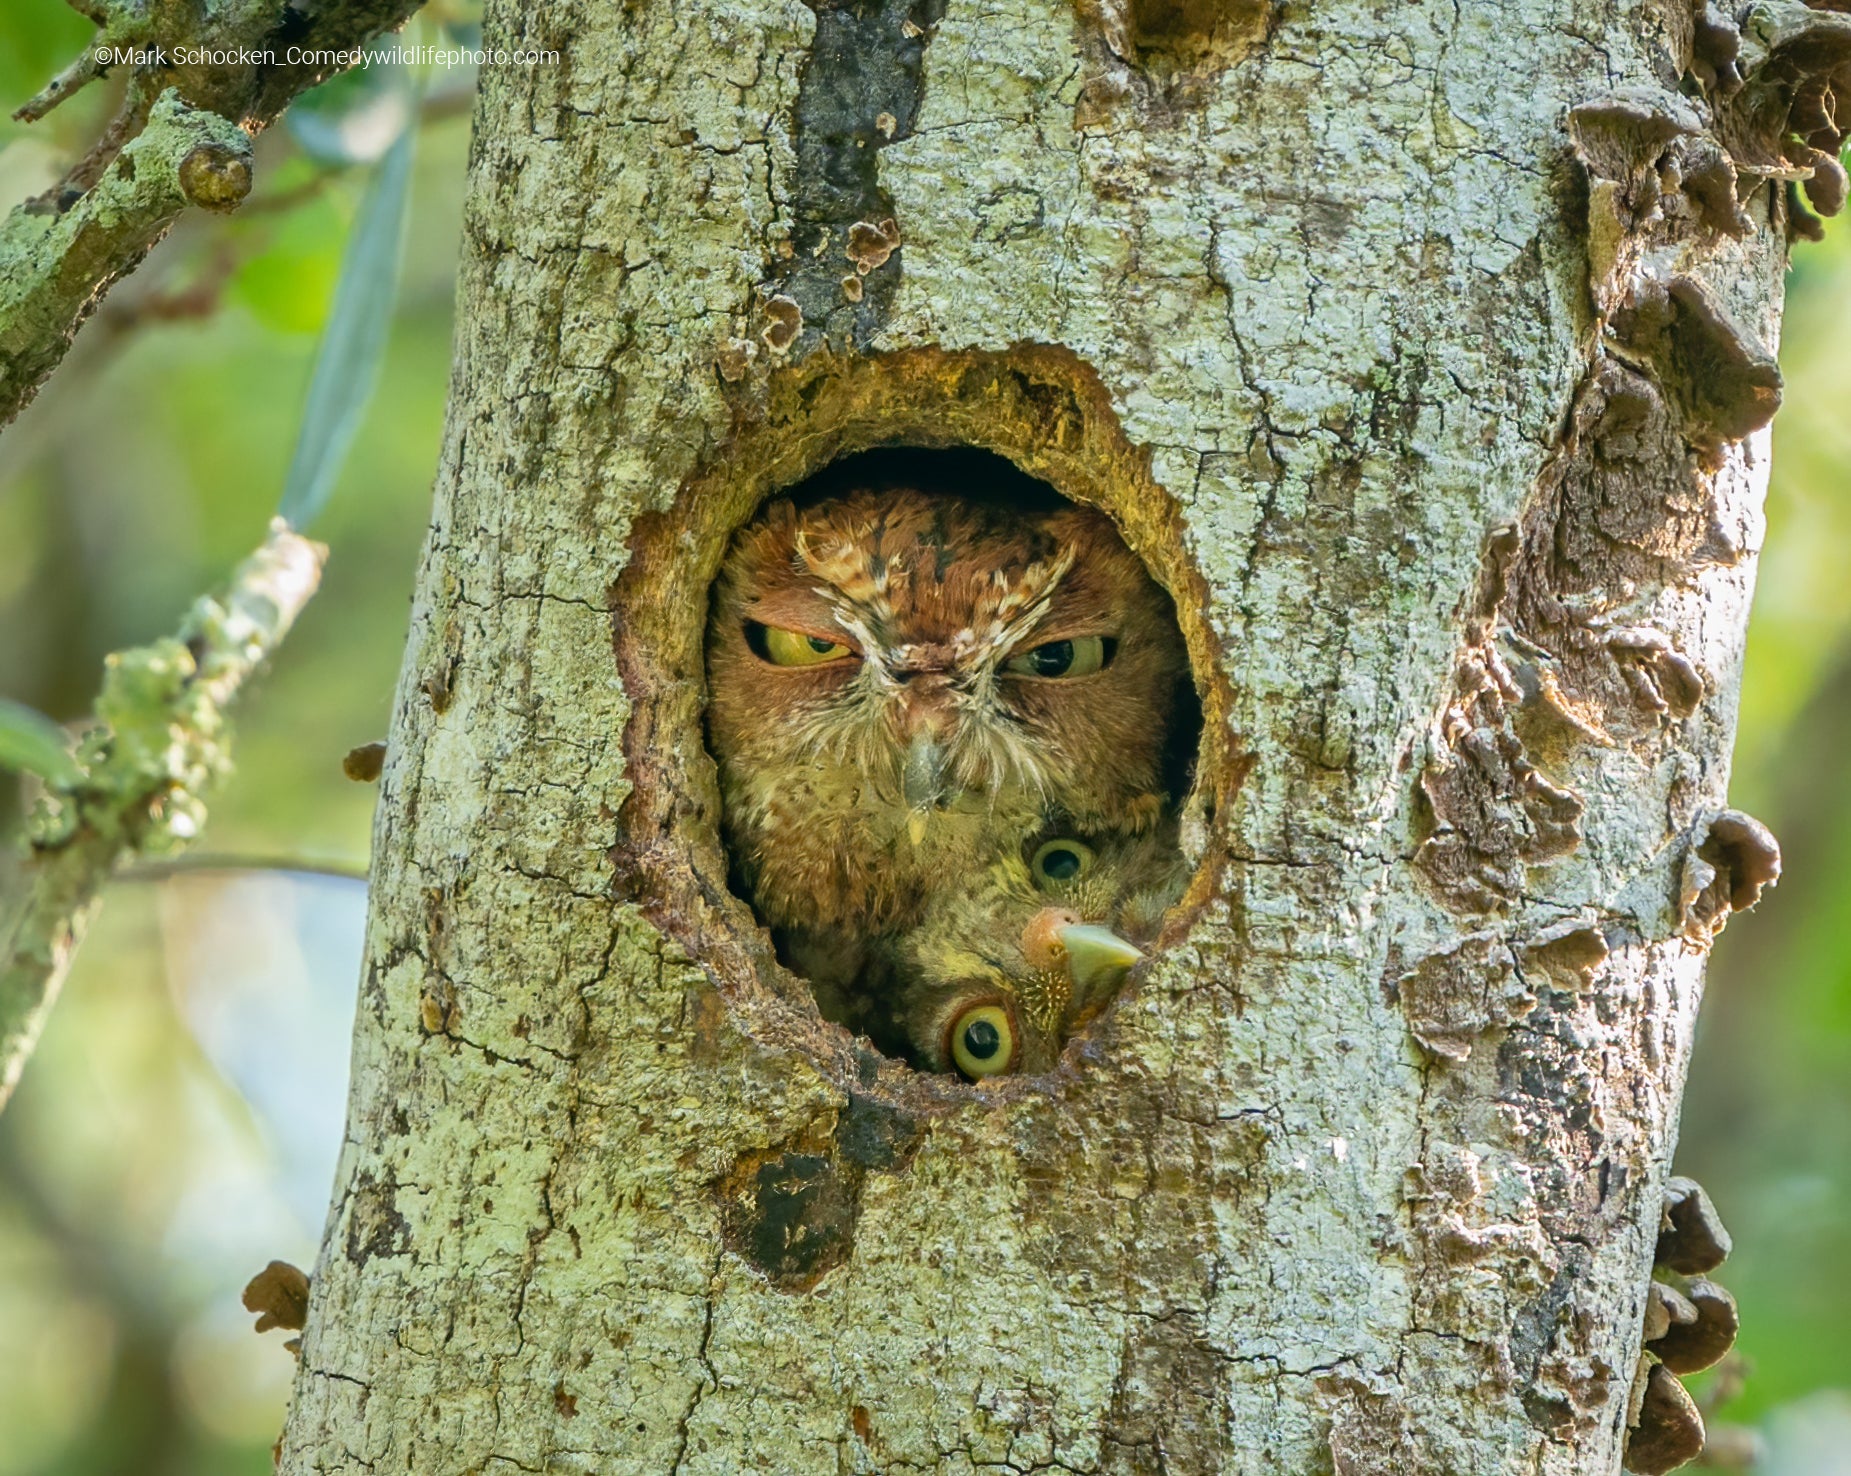 This pair of Eastern screech owls seem like they'd be fun to hang out with. (Photo: © Mark Schocken / Comedywildlifephoto.com.)